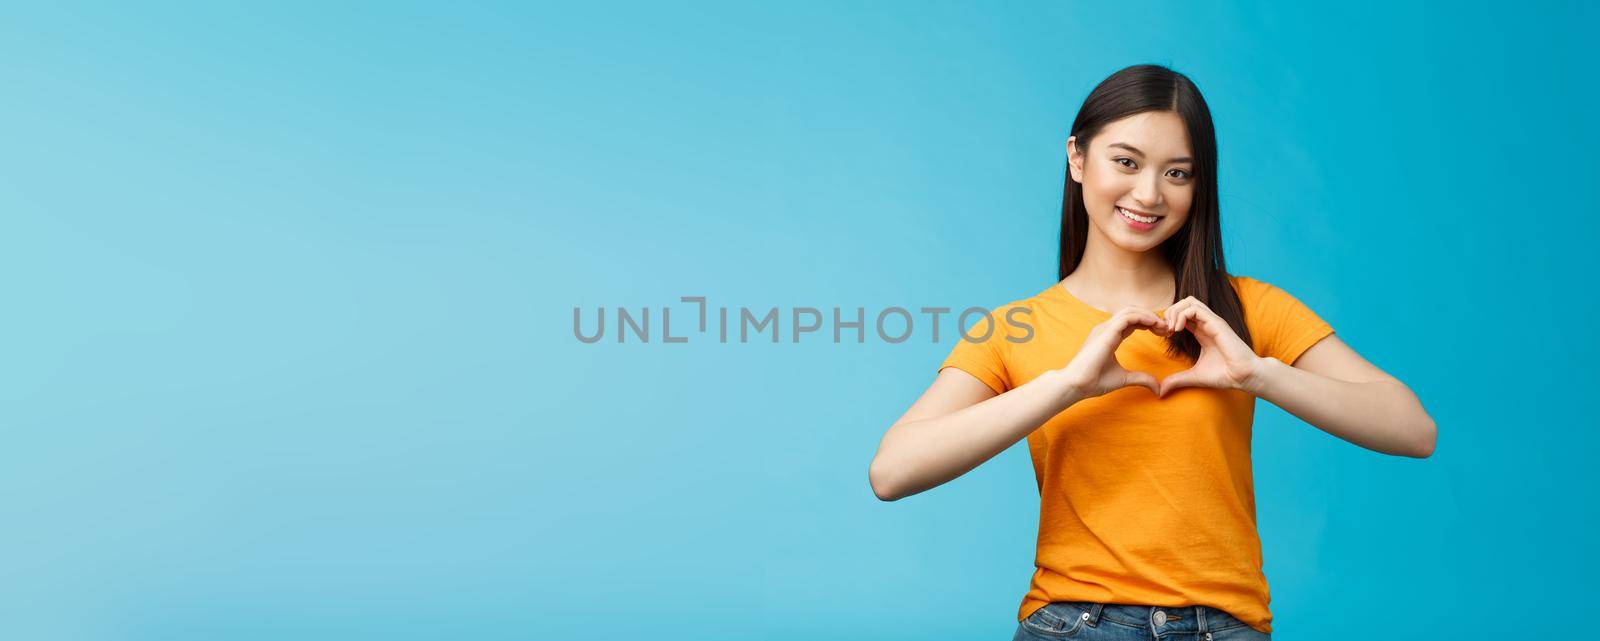 Lovely caring attractive asian girlfriend show heart sign cherish and value relationship, smiling broadly supportive, stand blue background wear yellow t-shirt, promote peace and happiness.